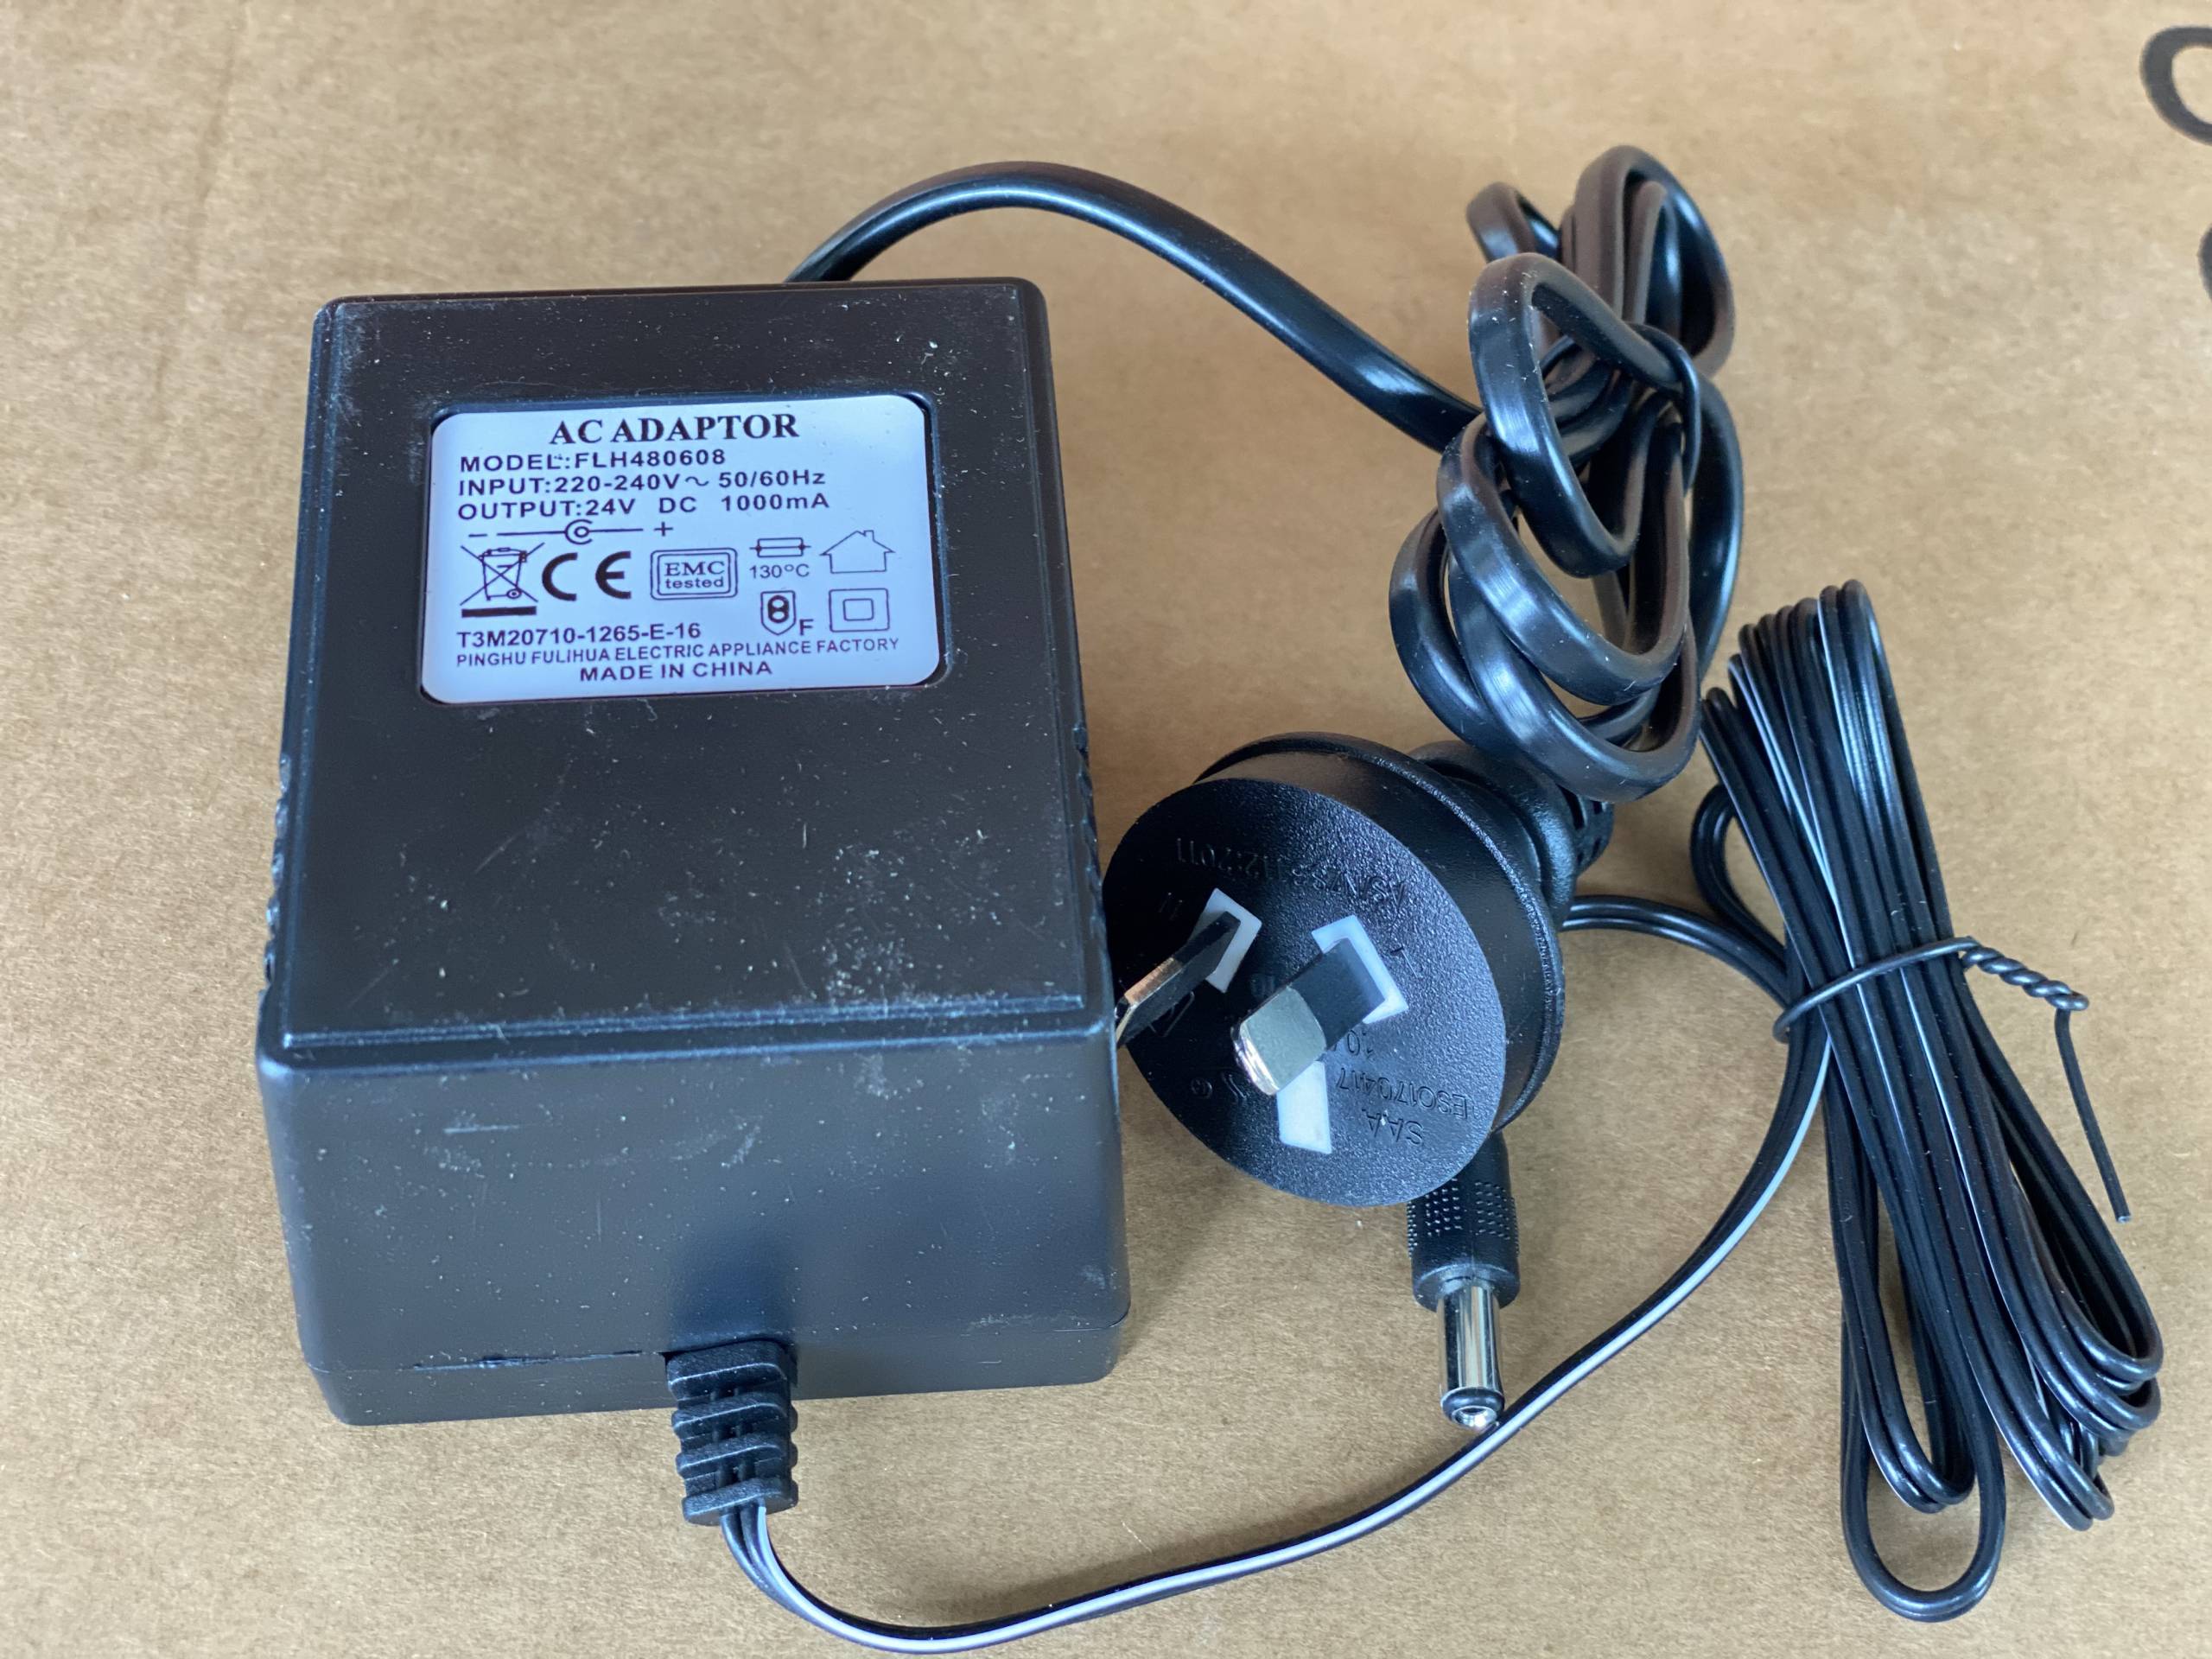 Replacement charger for 24v Ride on Toys